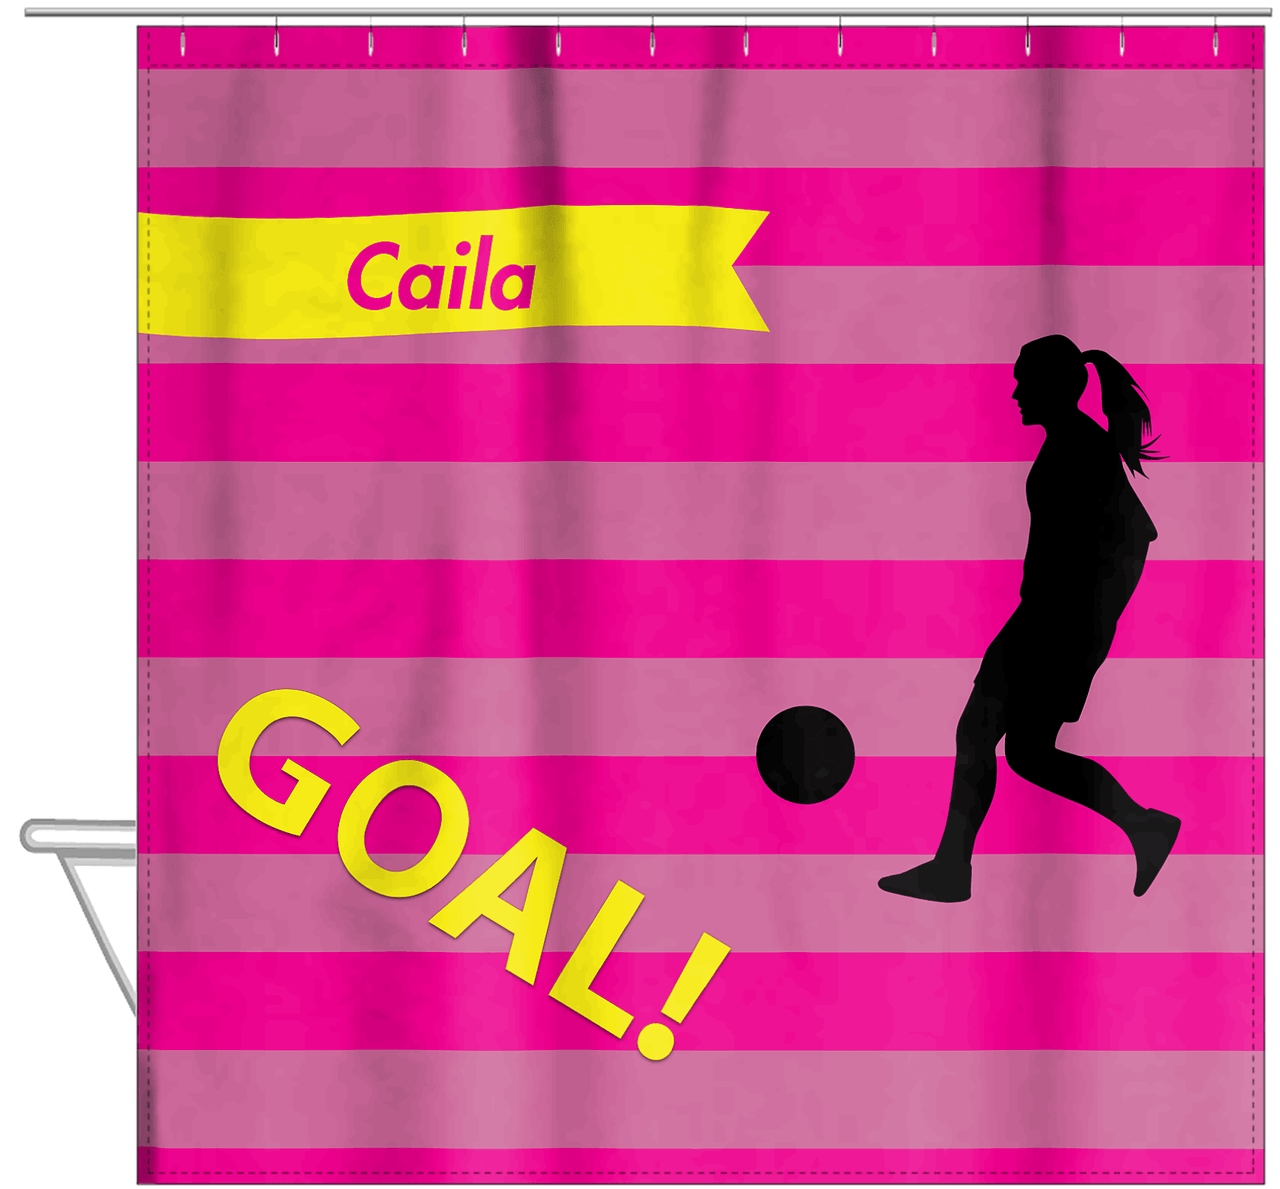 Personalized Soccer Shower Curtain XLIII - Pink Background - Girl Silhouette V - Hanging View